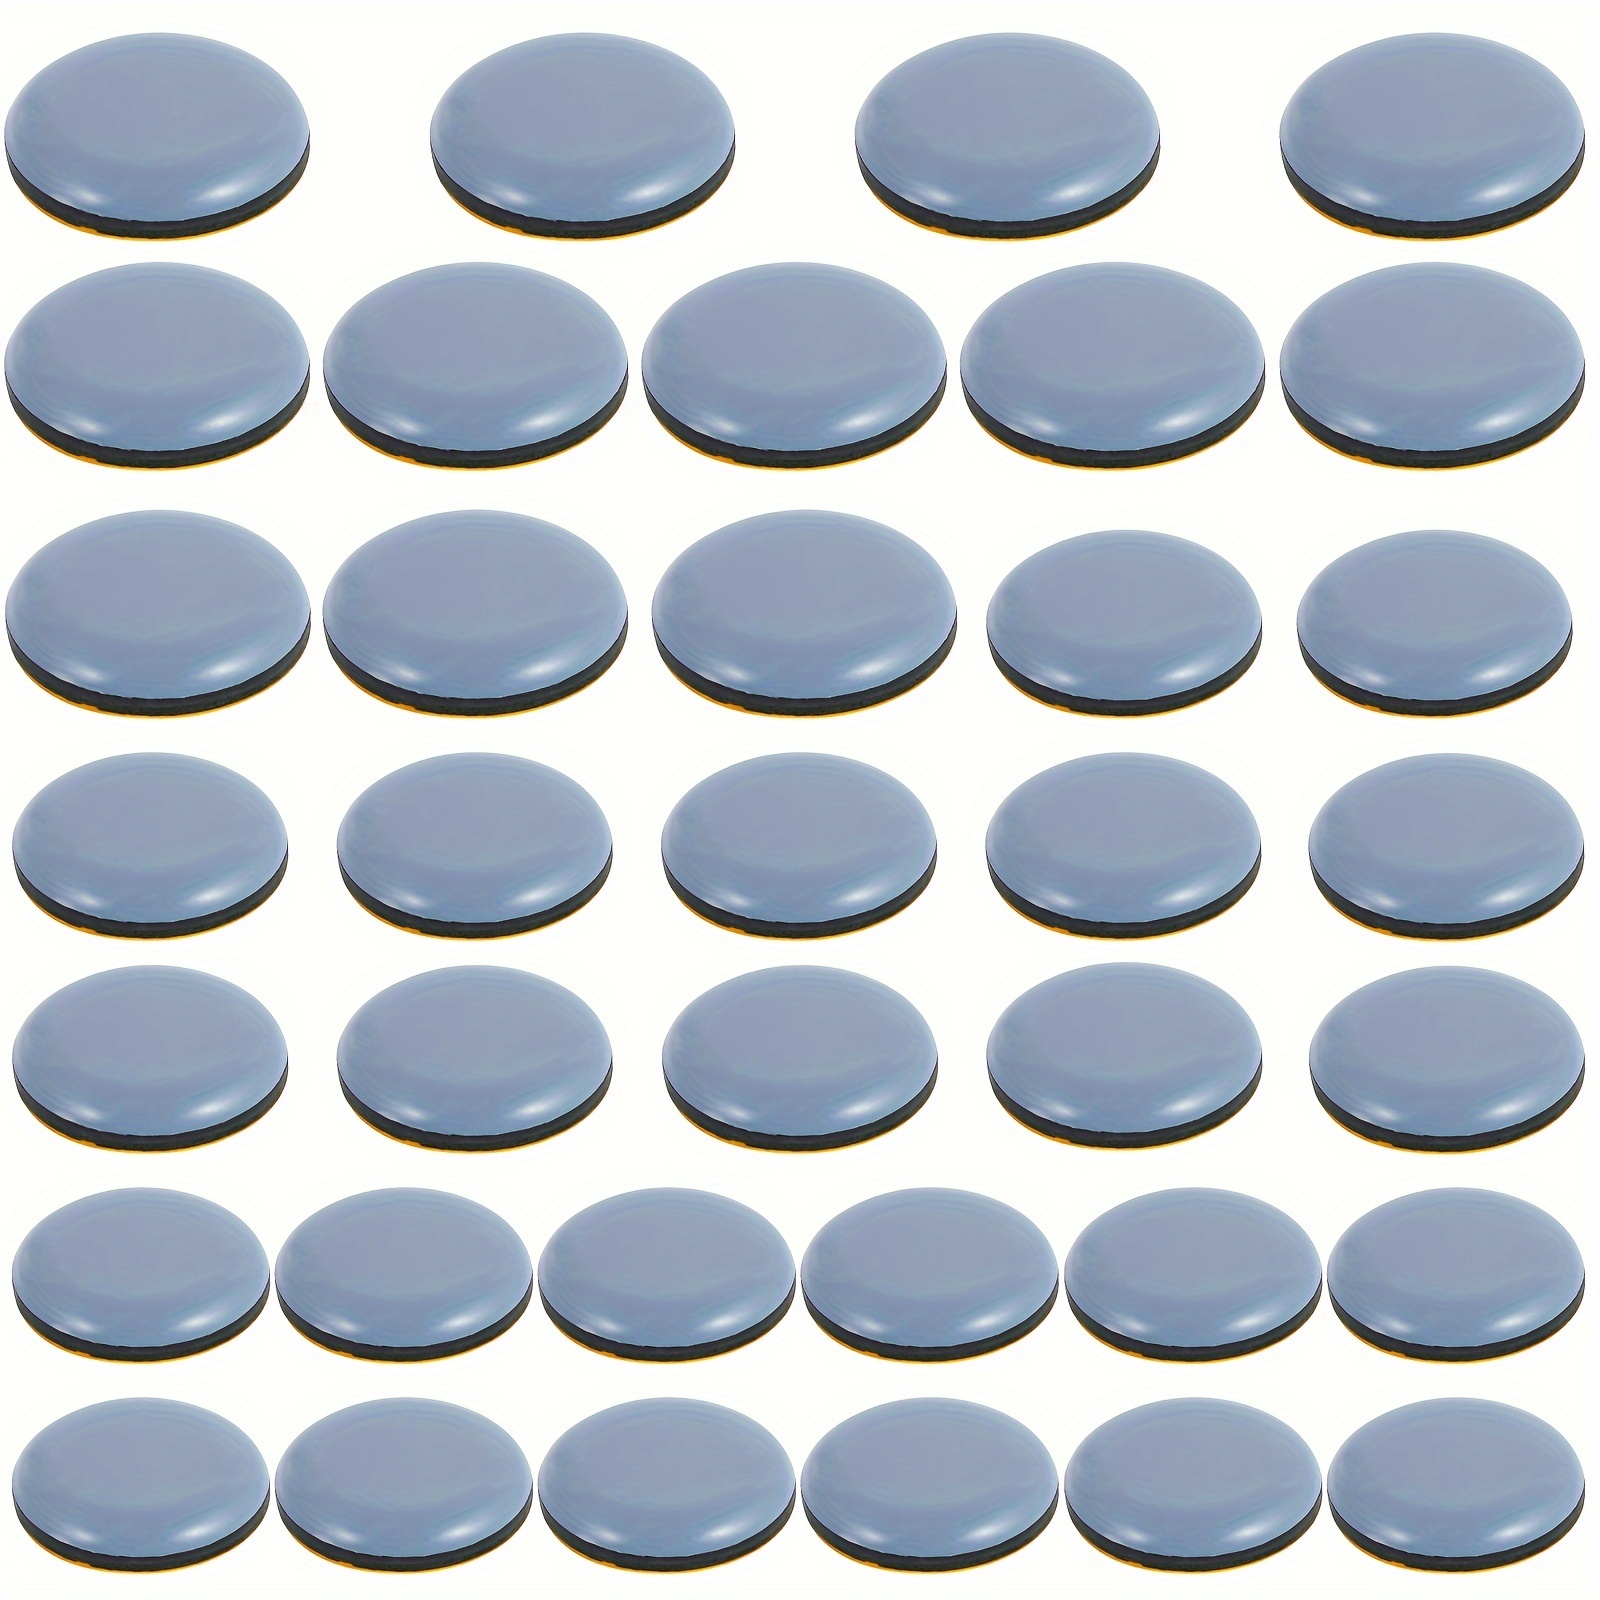 36Pcs Appliance Sliders for Kitchen Appliances, Self-Adhesive